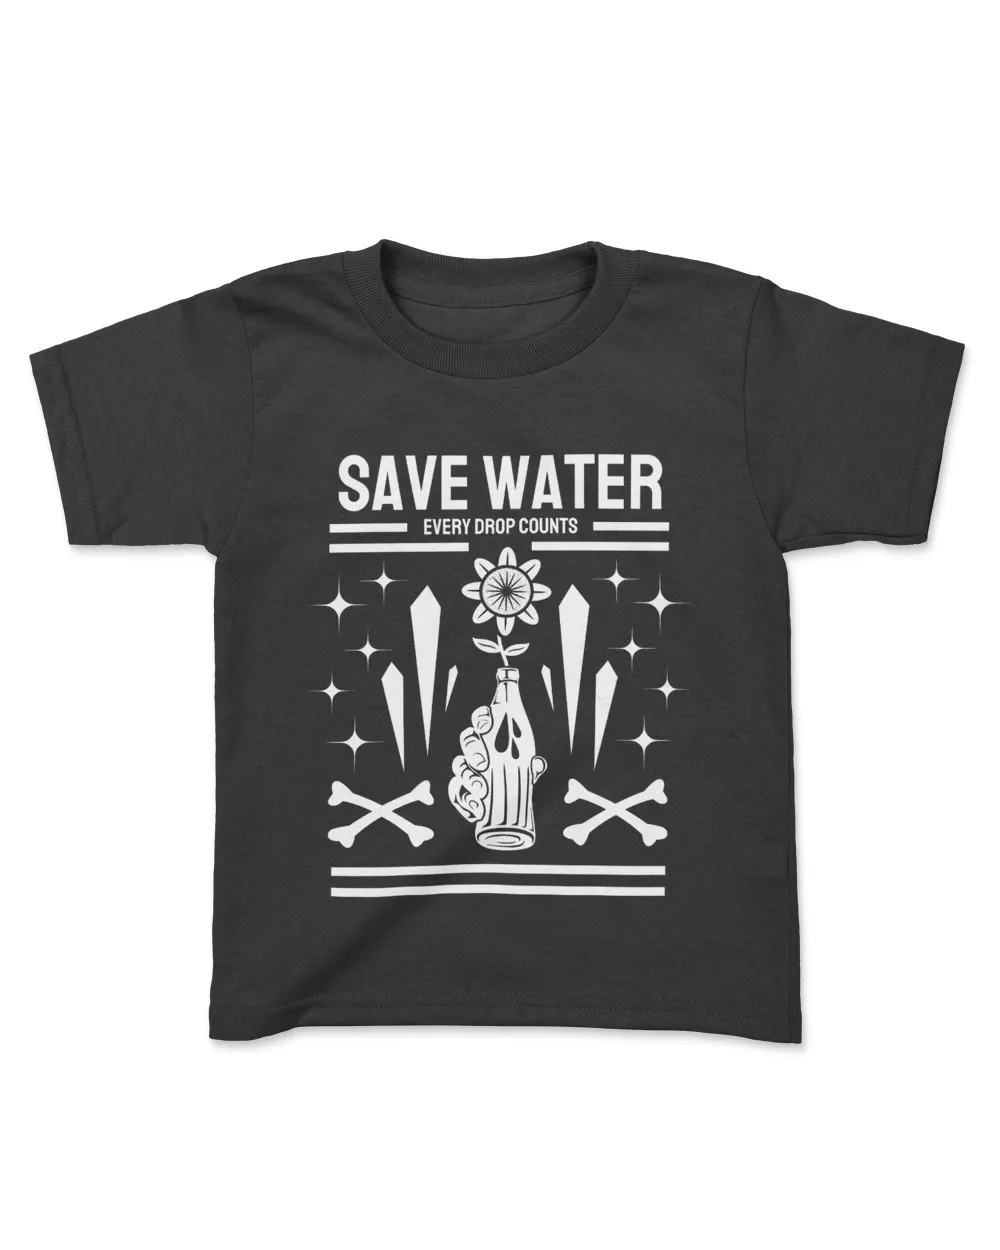 Save Water Every Drop Counts (Earth Day Slogan T-Shirt)